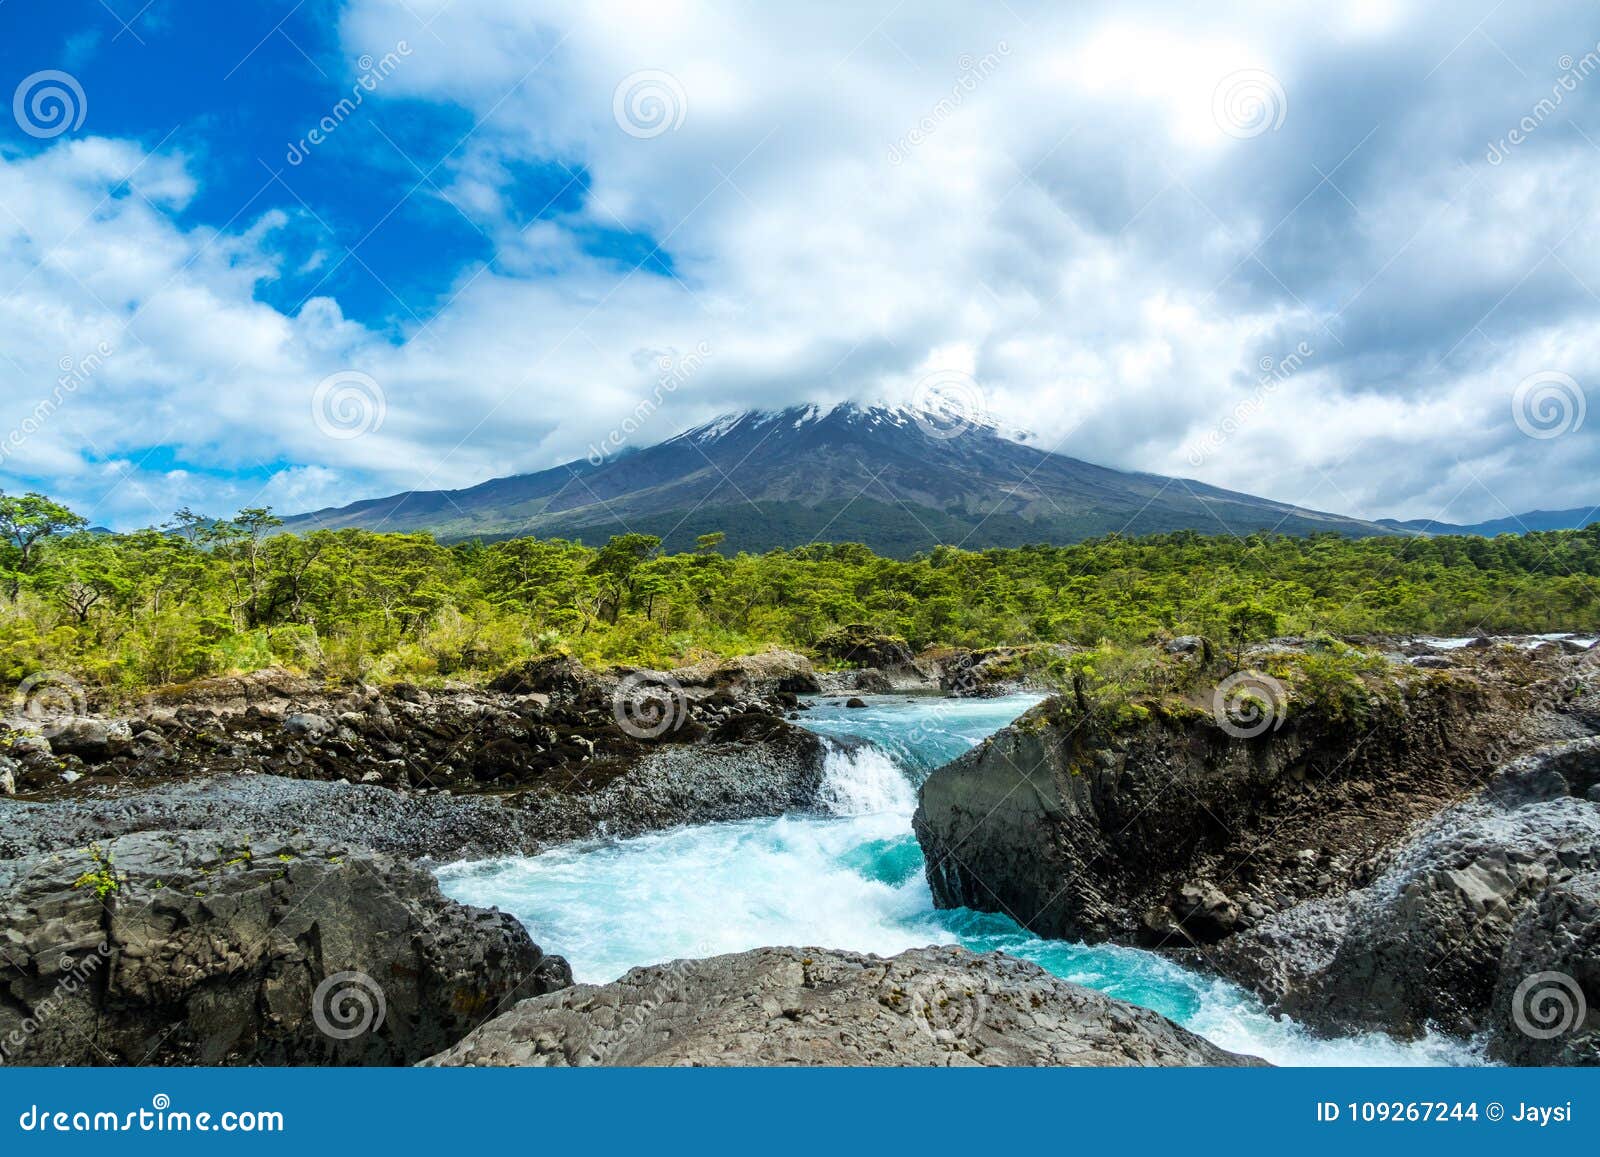 osorno volcano view from petrohue waterfall, los lagos landscape, chile, south america